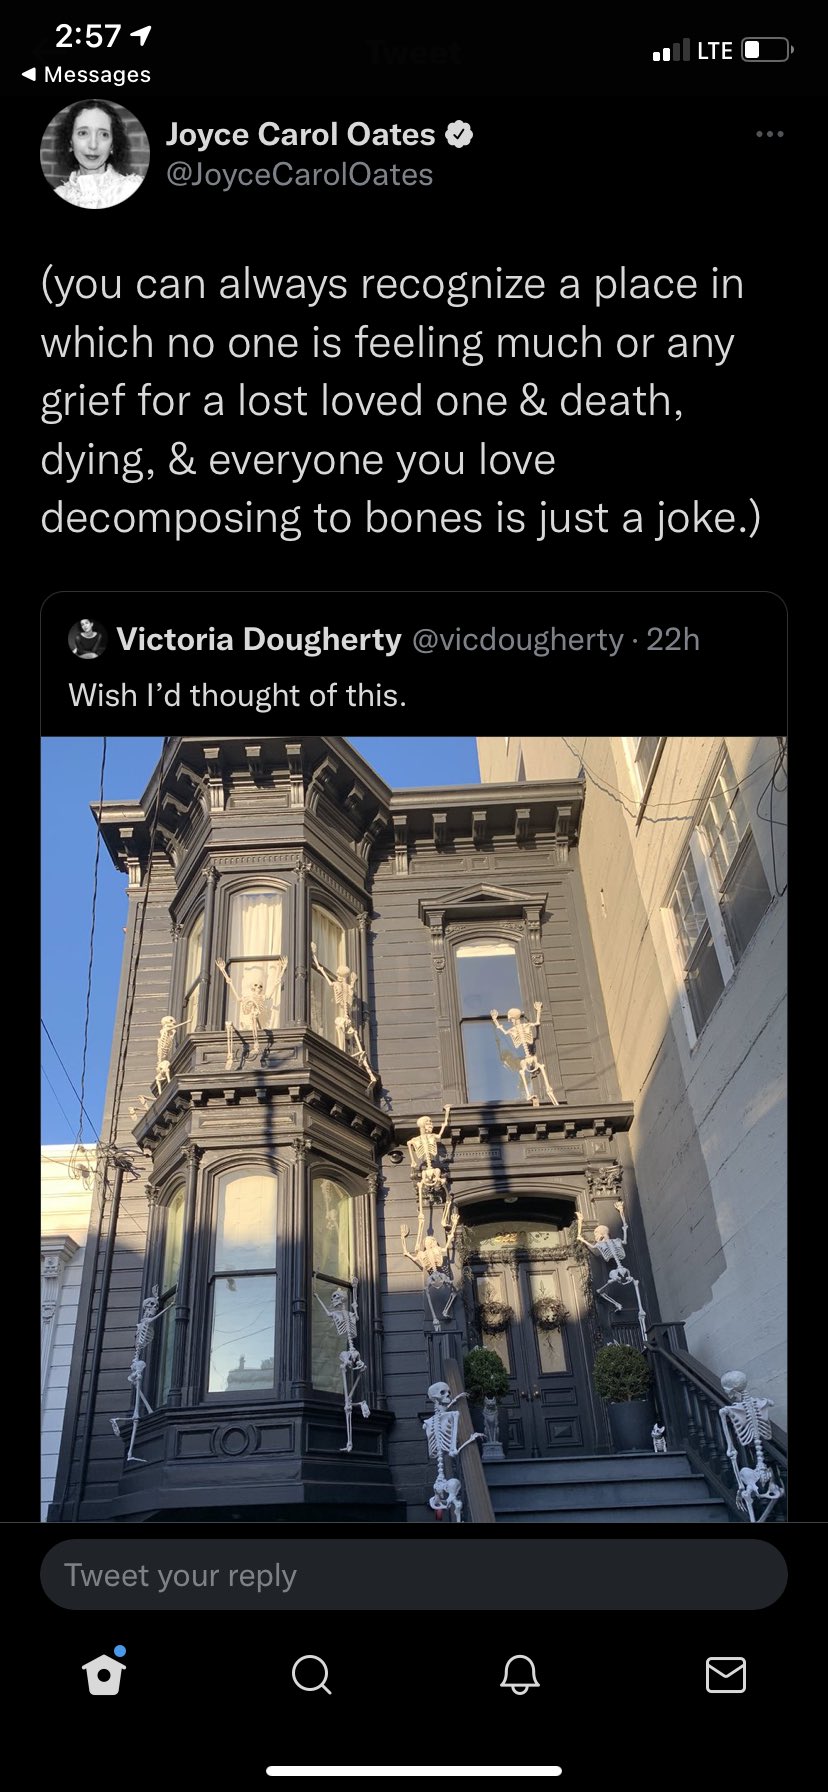 wtf tweets - joyce carol oates skeleton - 1 Lte I Messages Joyce Carol Oates you can always recognize a place in which no one is feeling much or any grief for a lost loved one & death, dying, & everyone you love decomposing to bones is just a joke. Victor